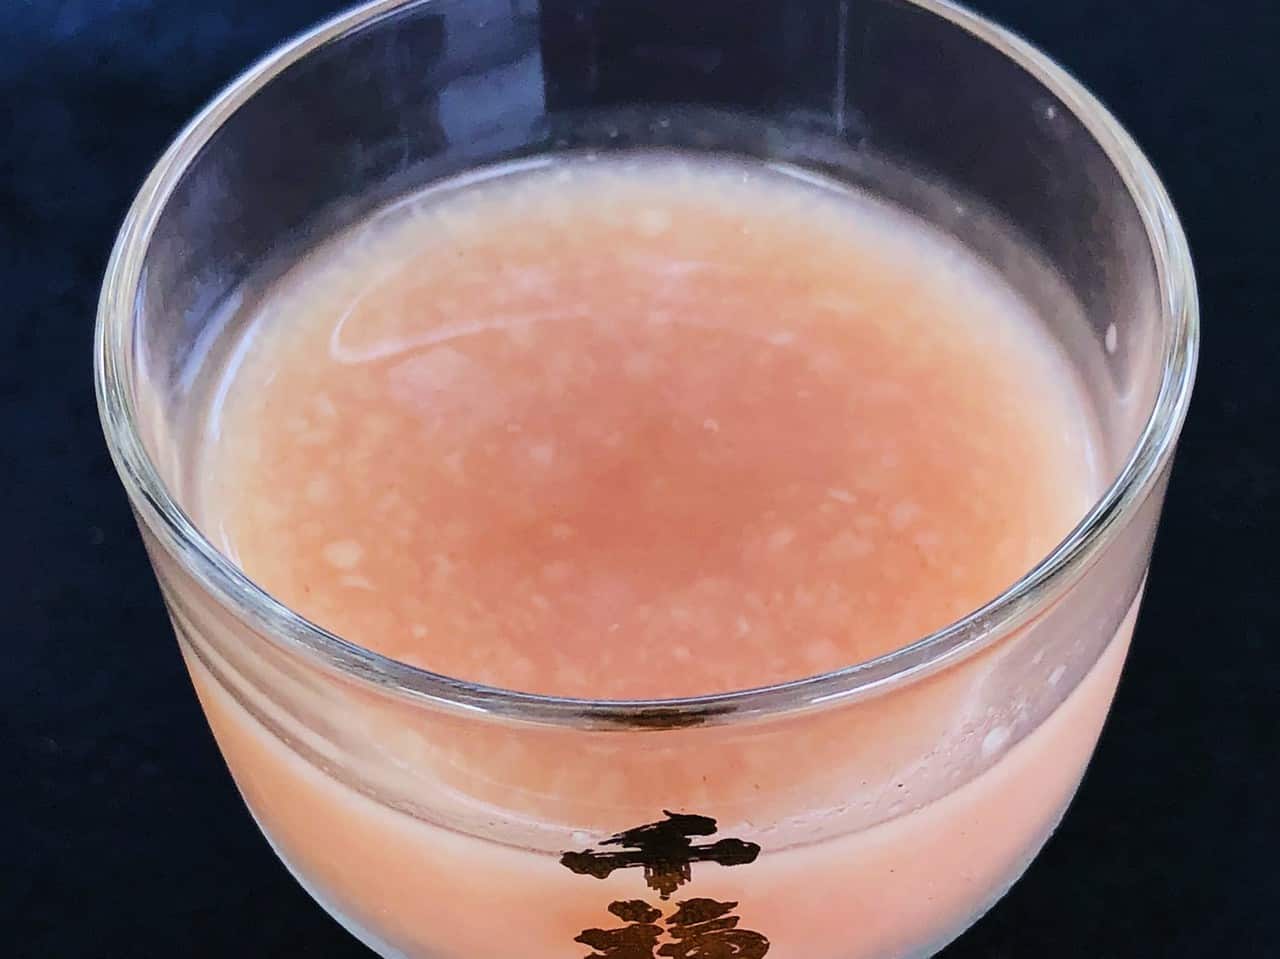 Visible lumps at the surface of  rosé doburoku, an unfiltered sake in Japan

